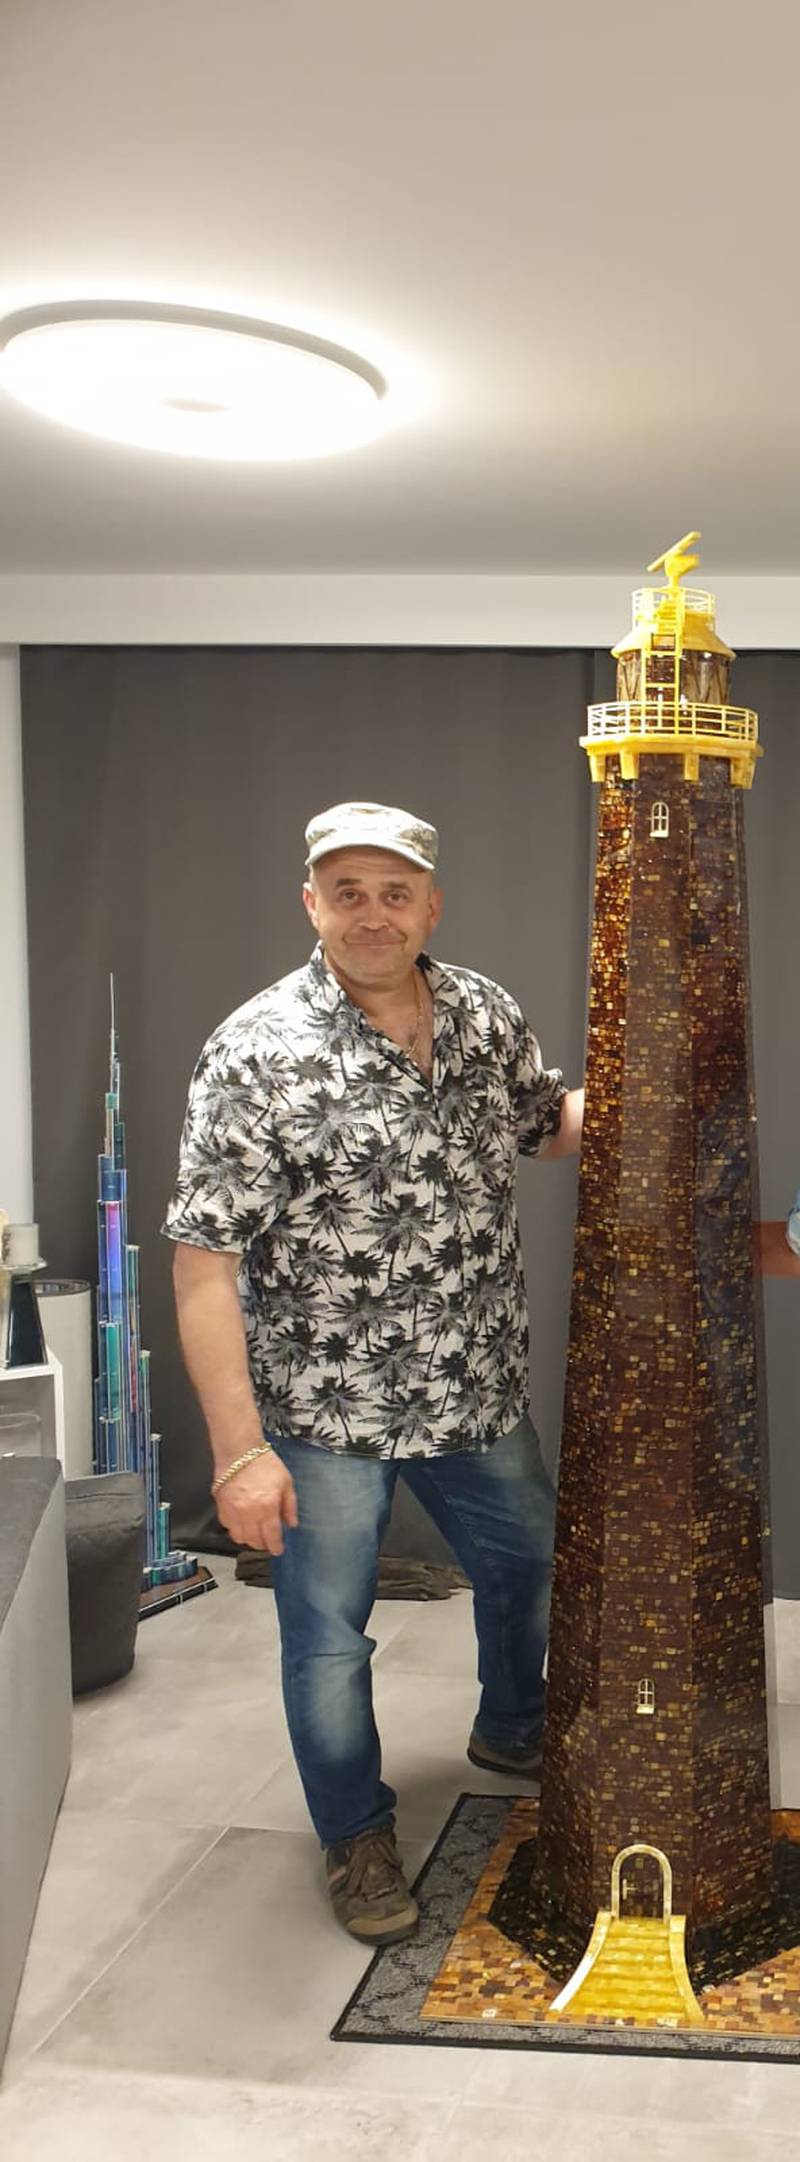 It took Polish designer Tomasz Oldziejewski seven weeks to build  the world’s largest amber sculpture a lighthouse that is 2-metre high using about 50kg of amber and features in the Guinness World Records.